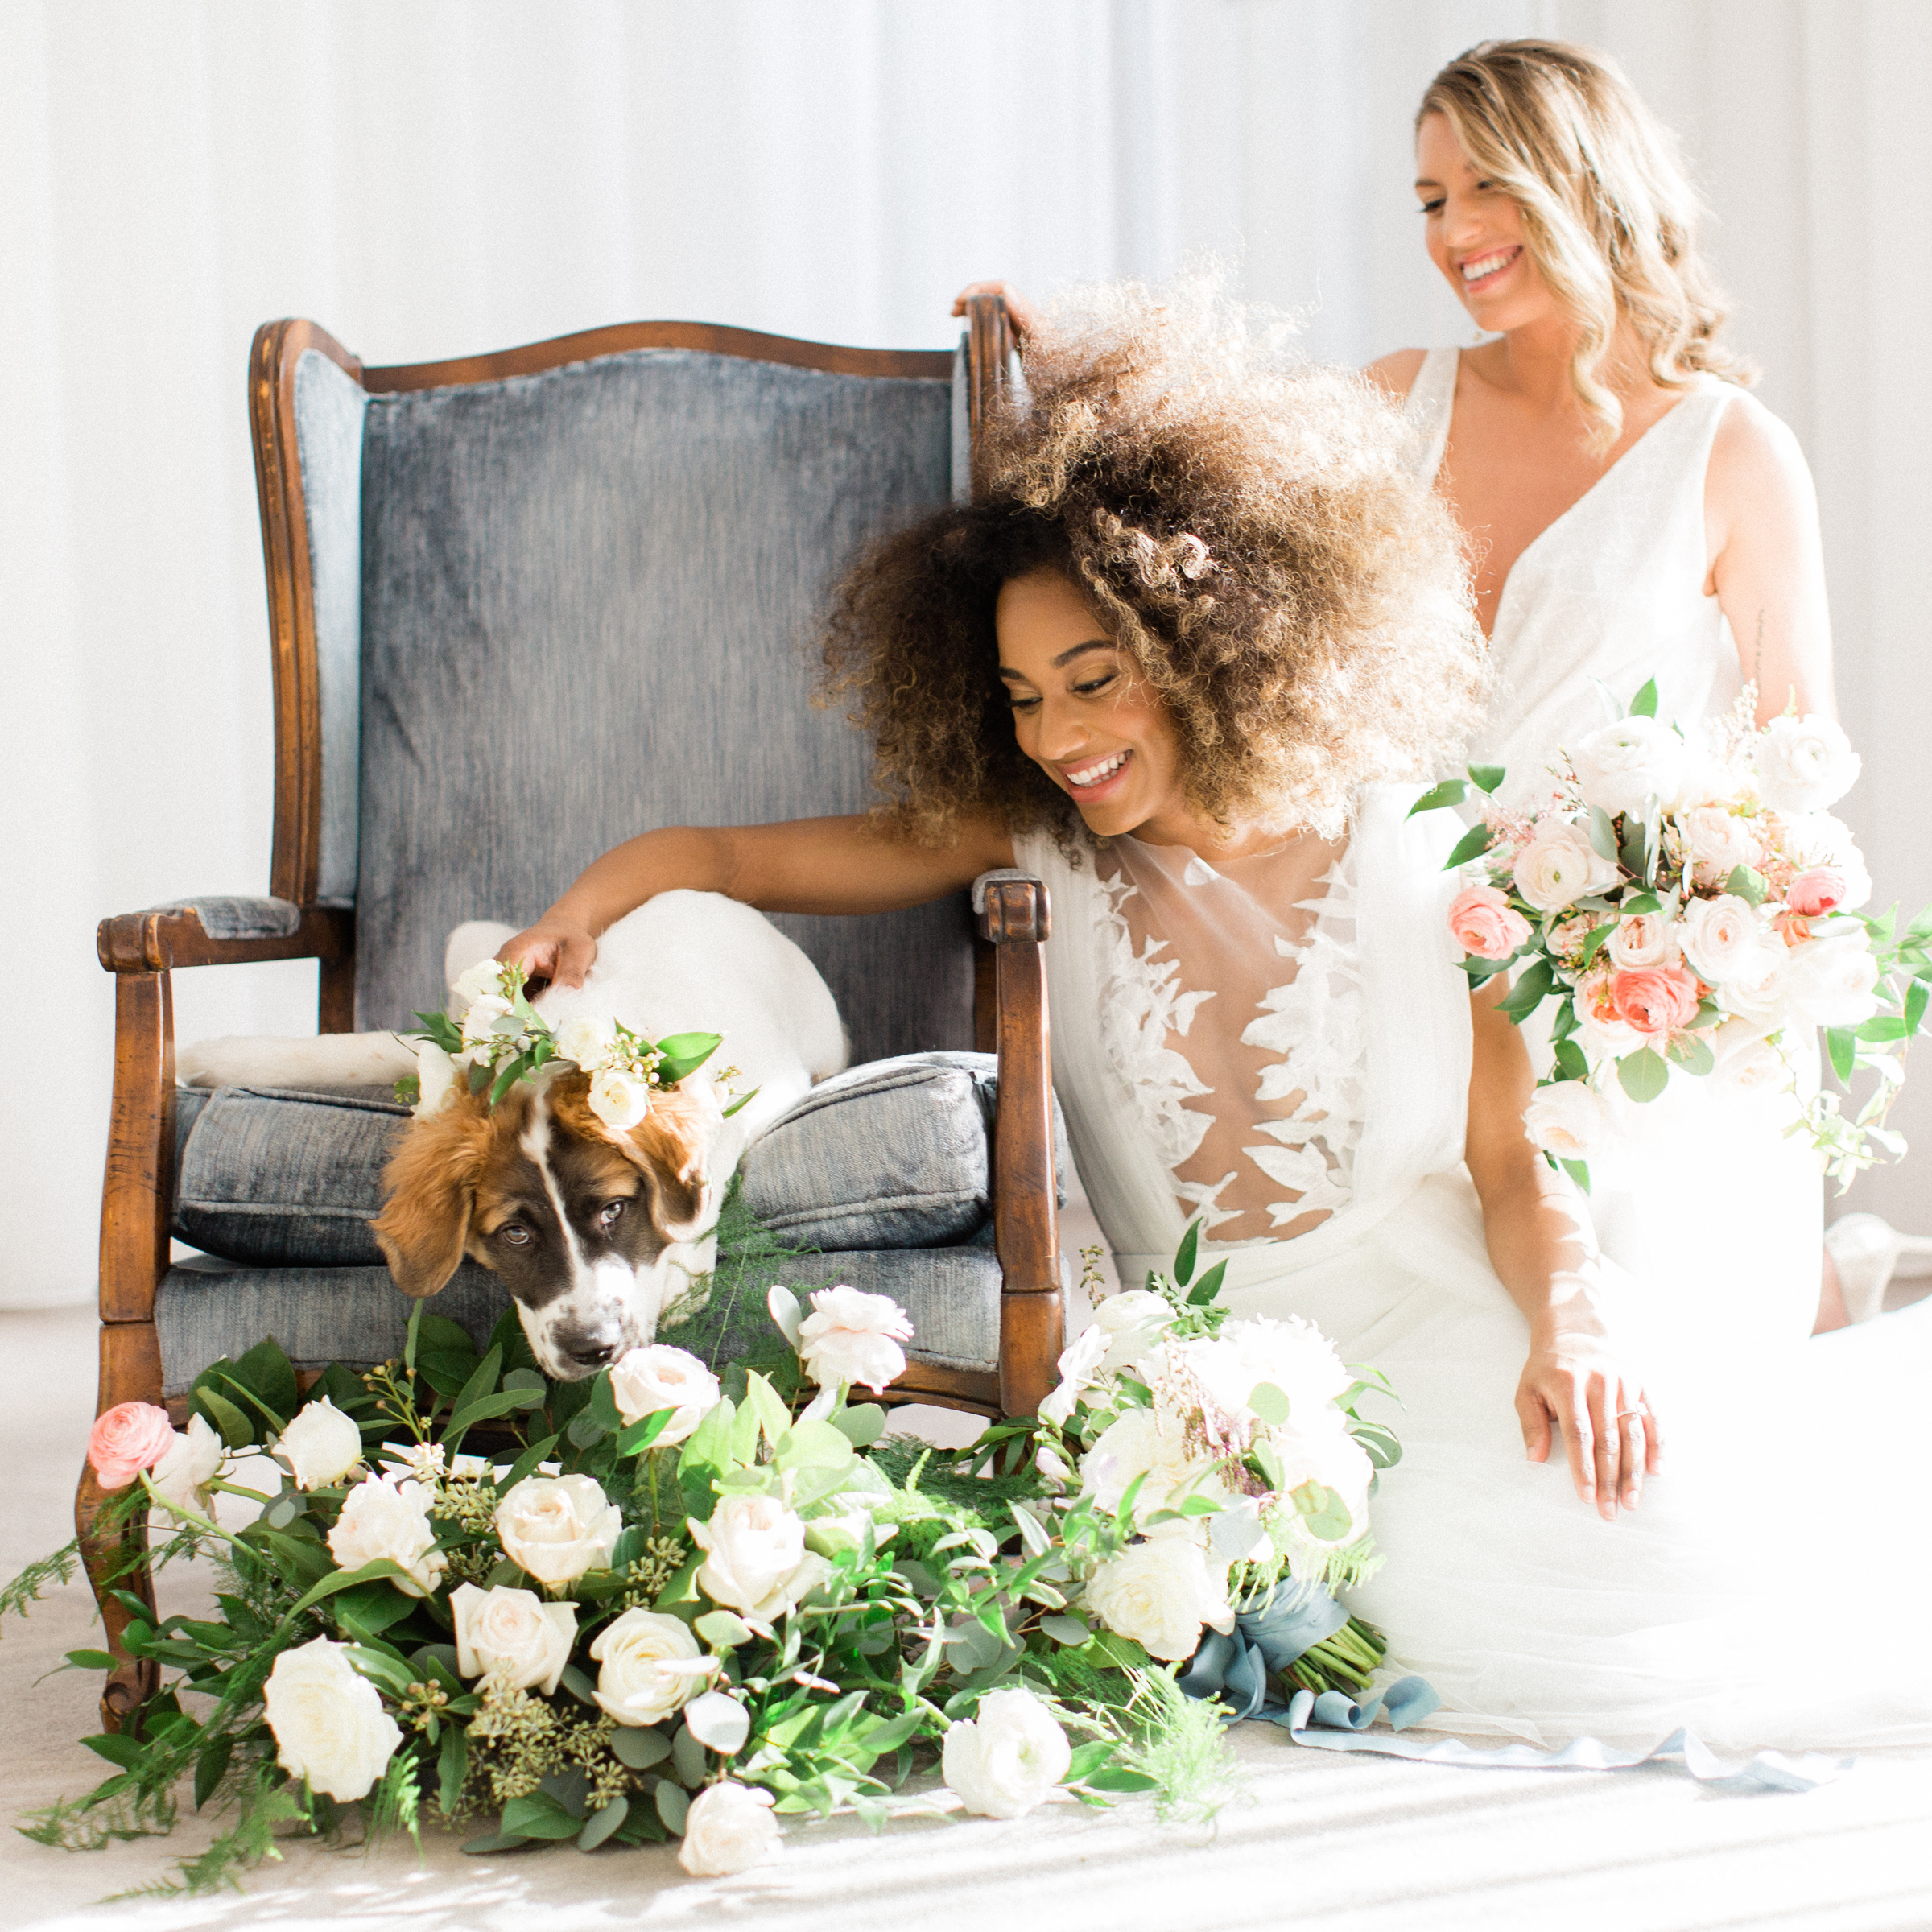 Chicago Wedding Inspiration with Two Brides